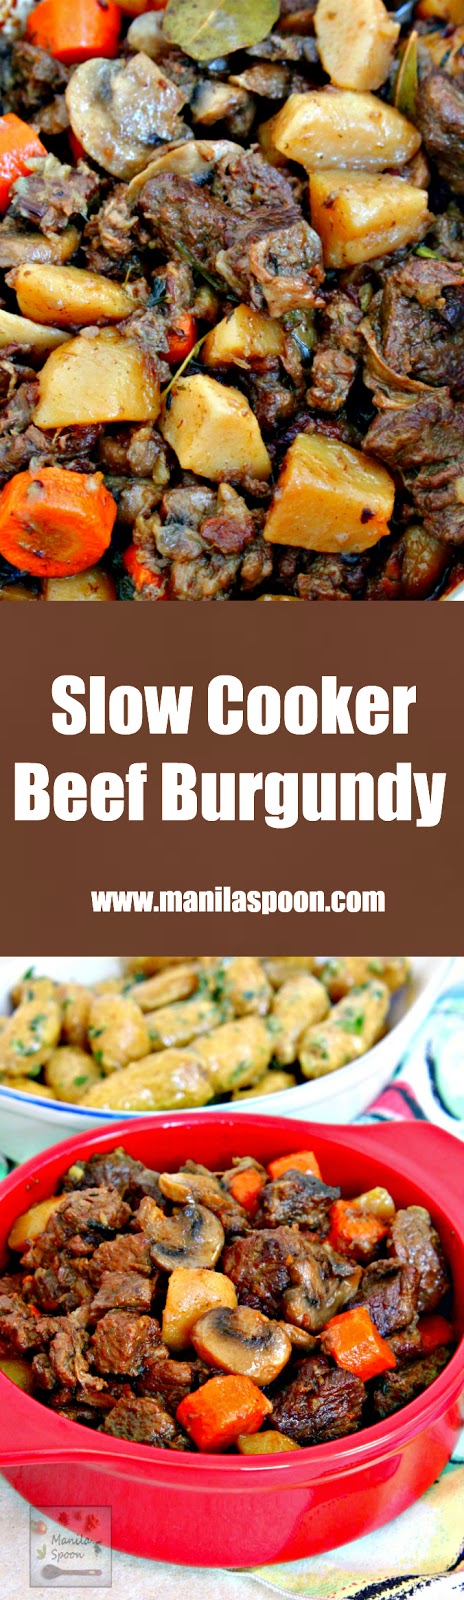 Beef chunks are simmered in red wine in the slow cooker and results in a melt-in-your-mouth delicious stew! Make this crockpot version of the classic French stew - Beef Burgundy (Boeuf Bourguignon) in the morning and enjoy it for dinner. | manilaspoon.com